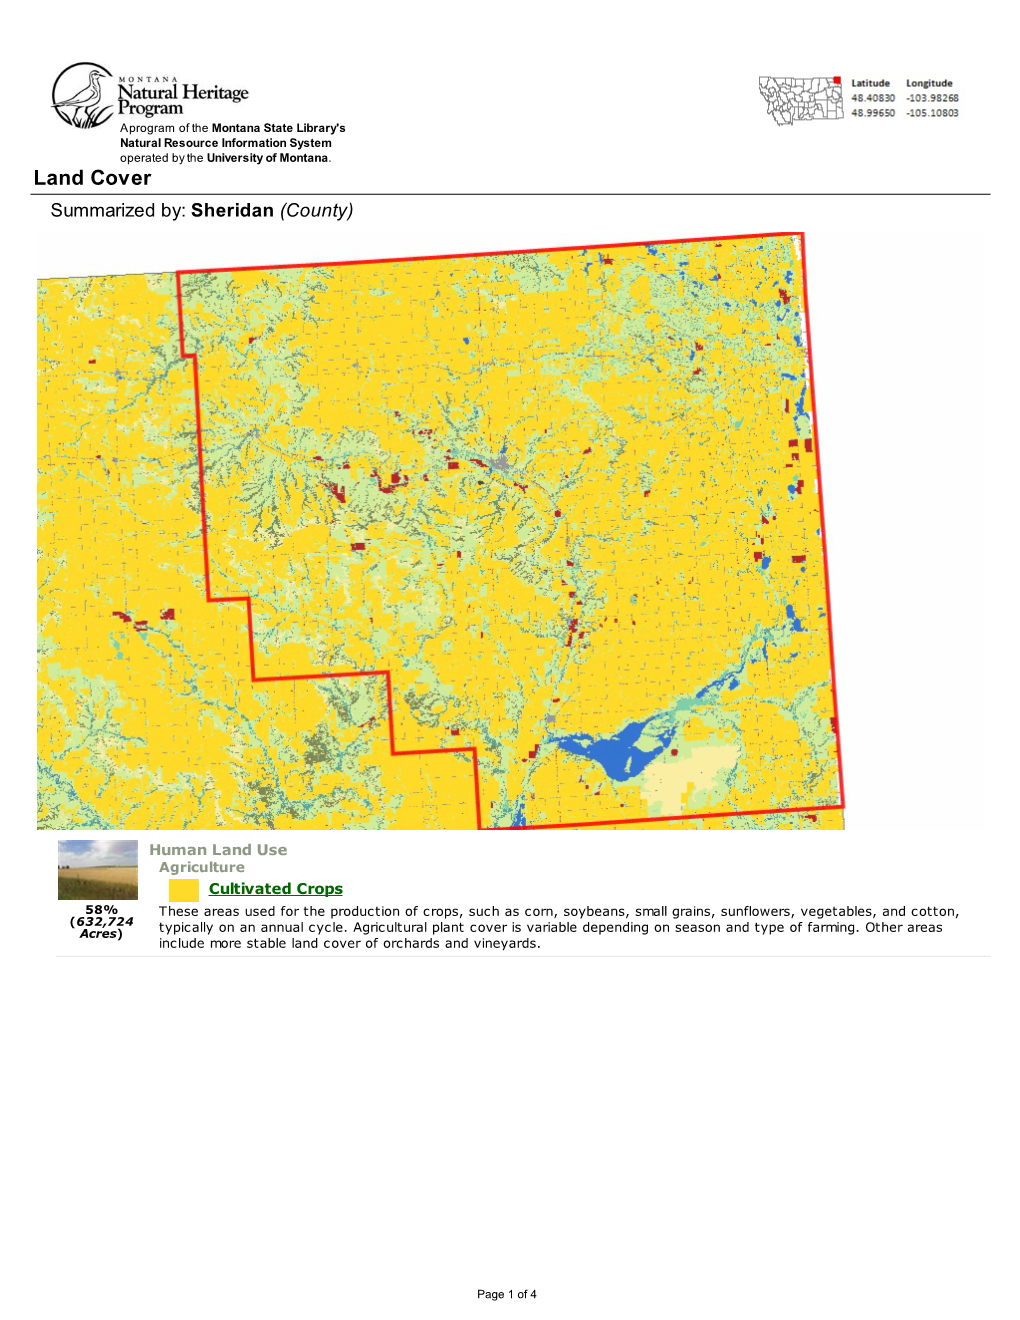 Land Cover Summarized By: Sheridan (County)